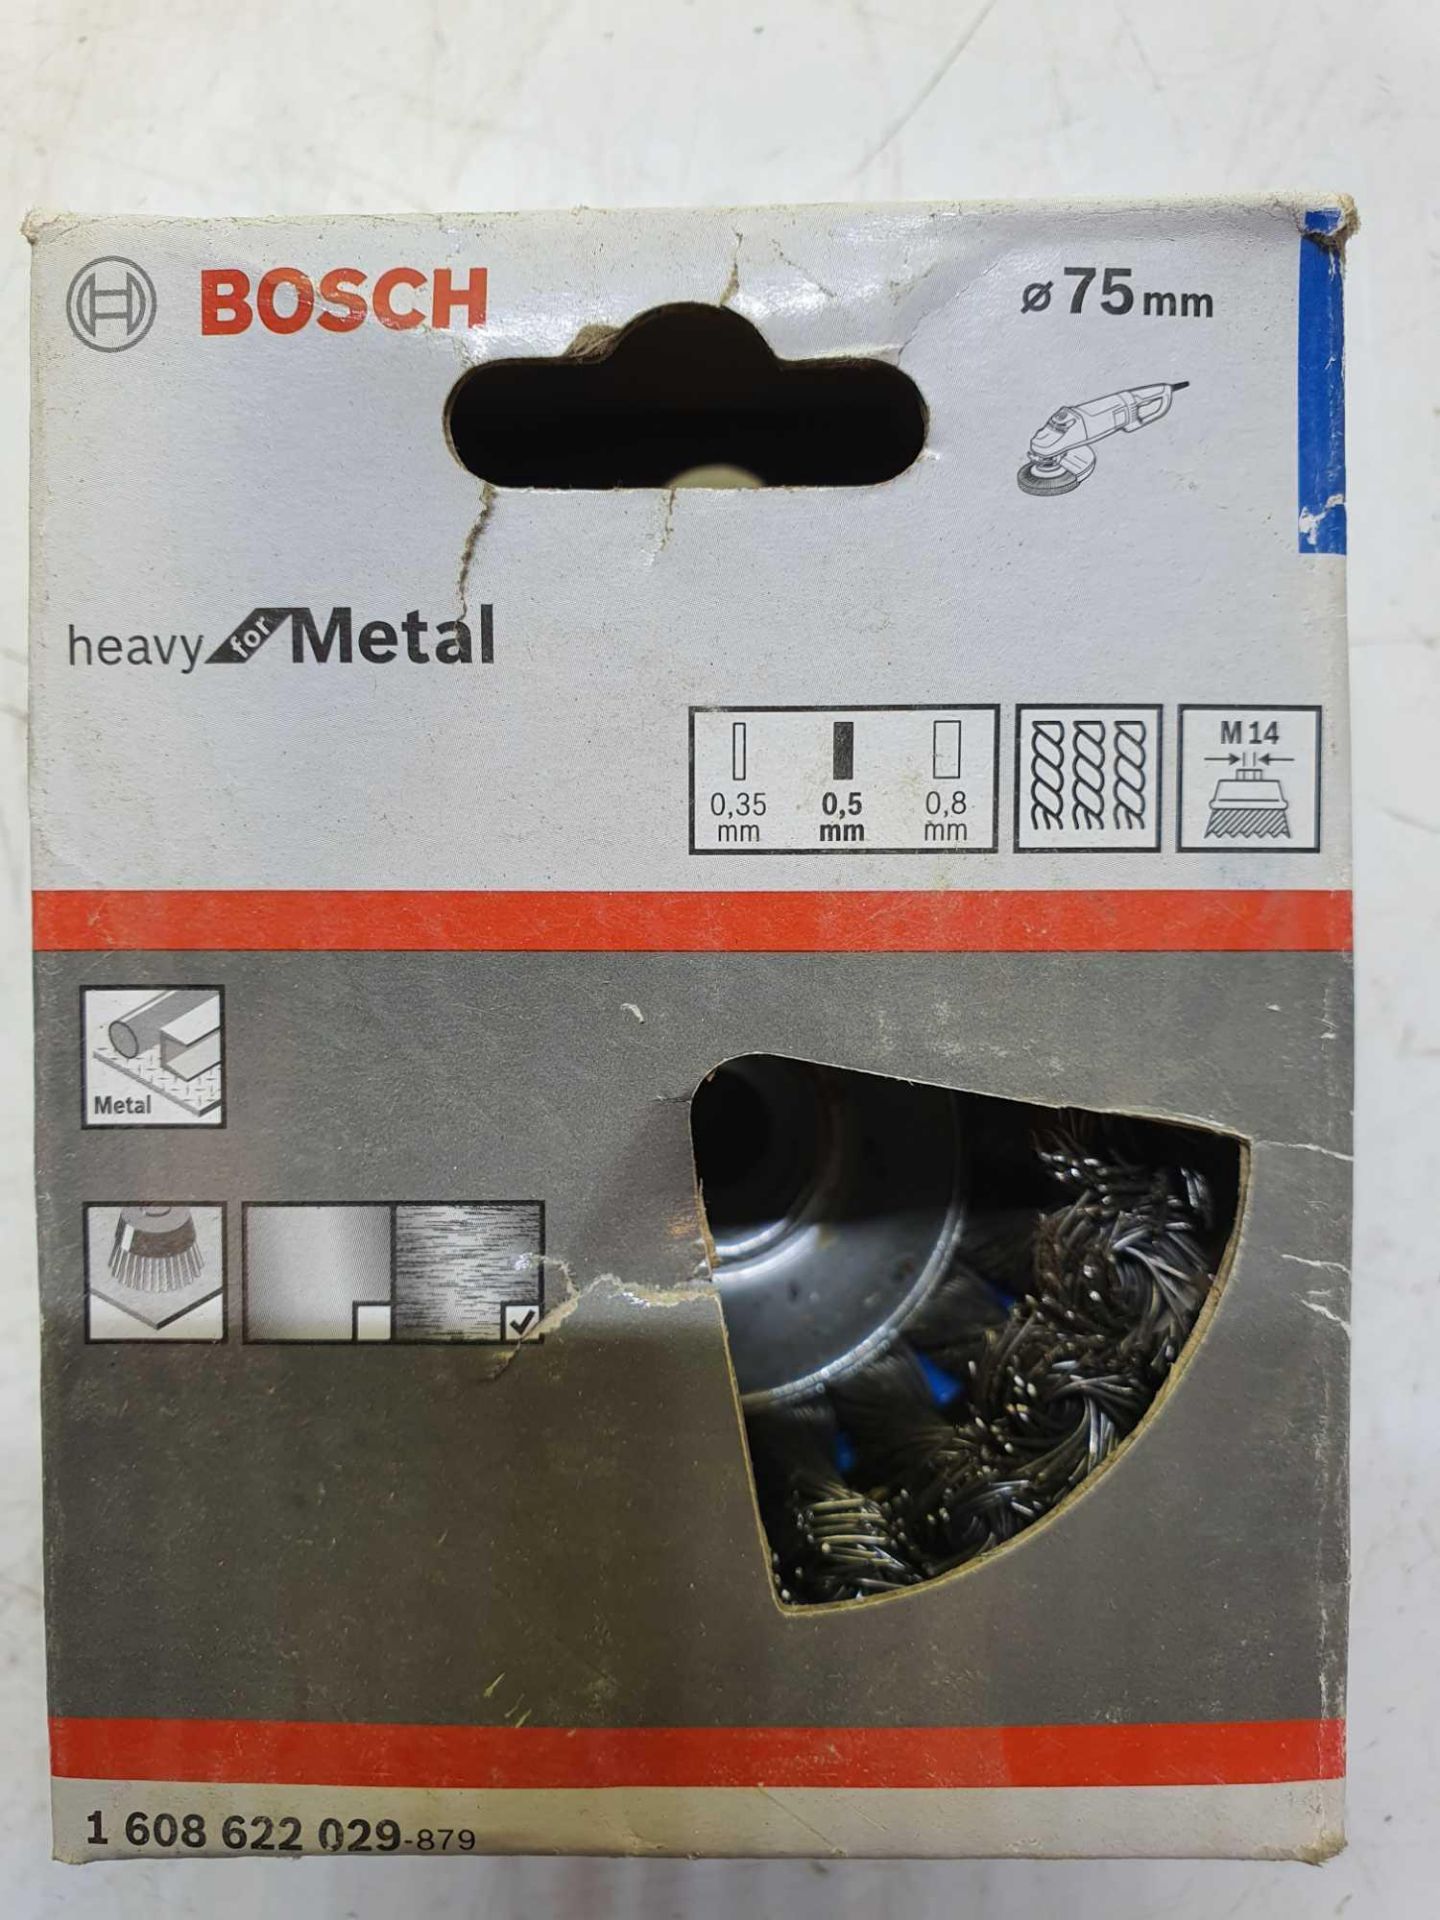 Bosch wire brush heads for grinder x2 - Image 2 of 2